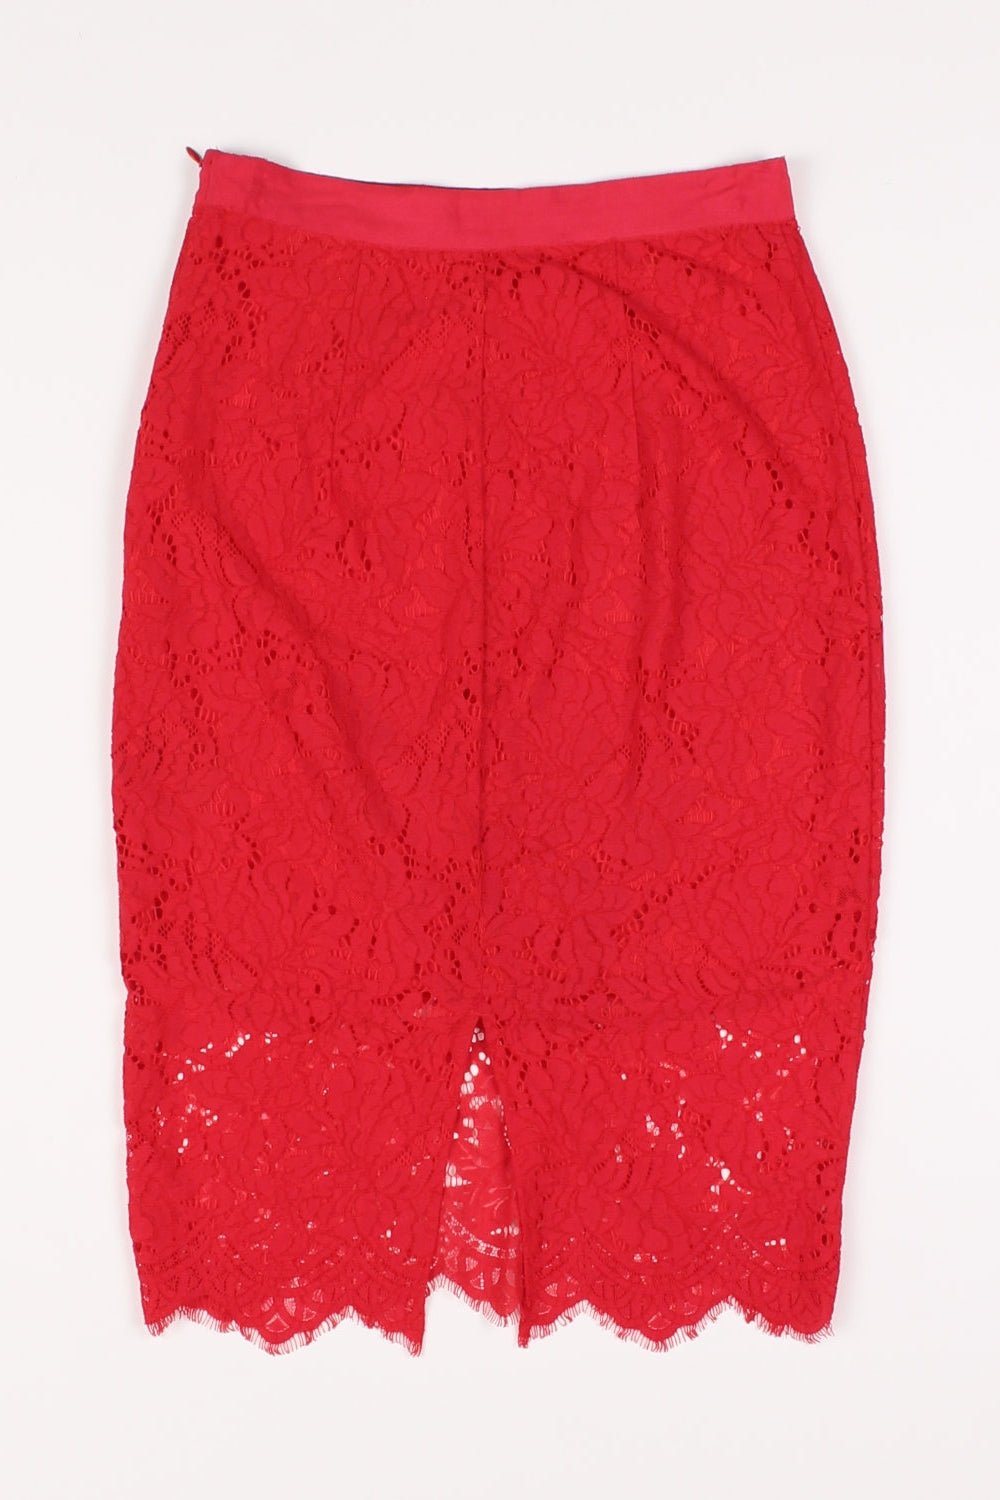 H&M Red Lace Midi Skirt 8